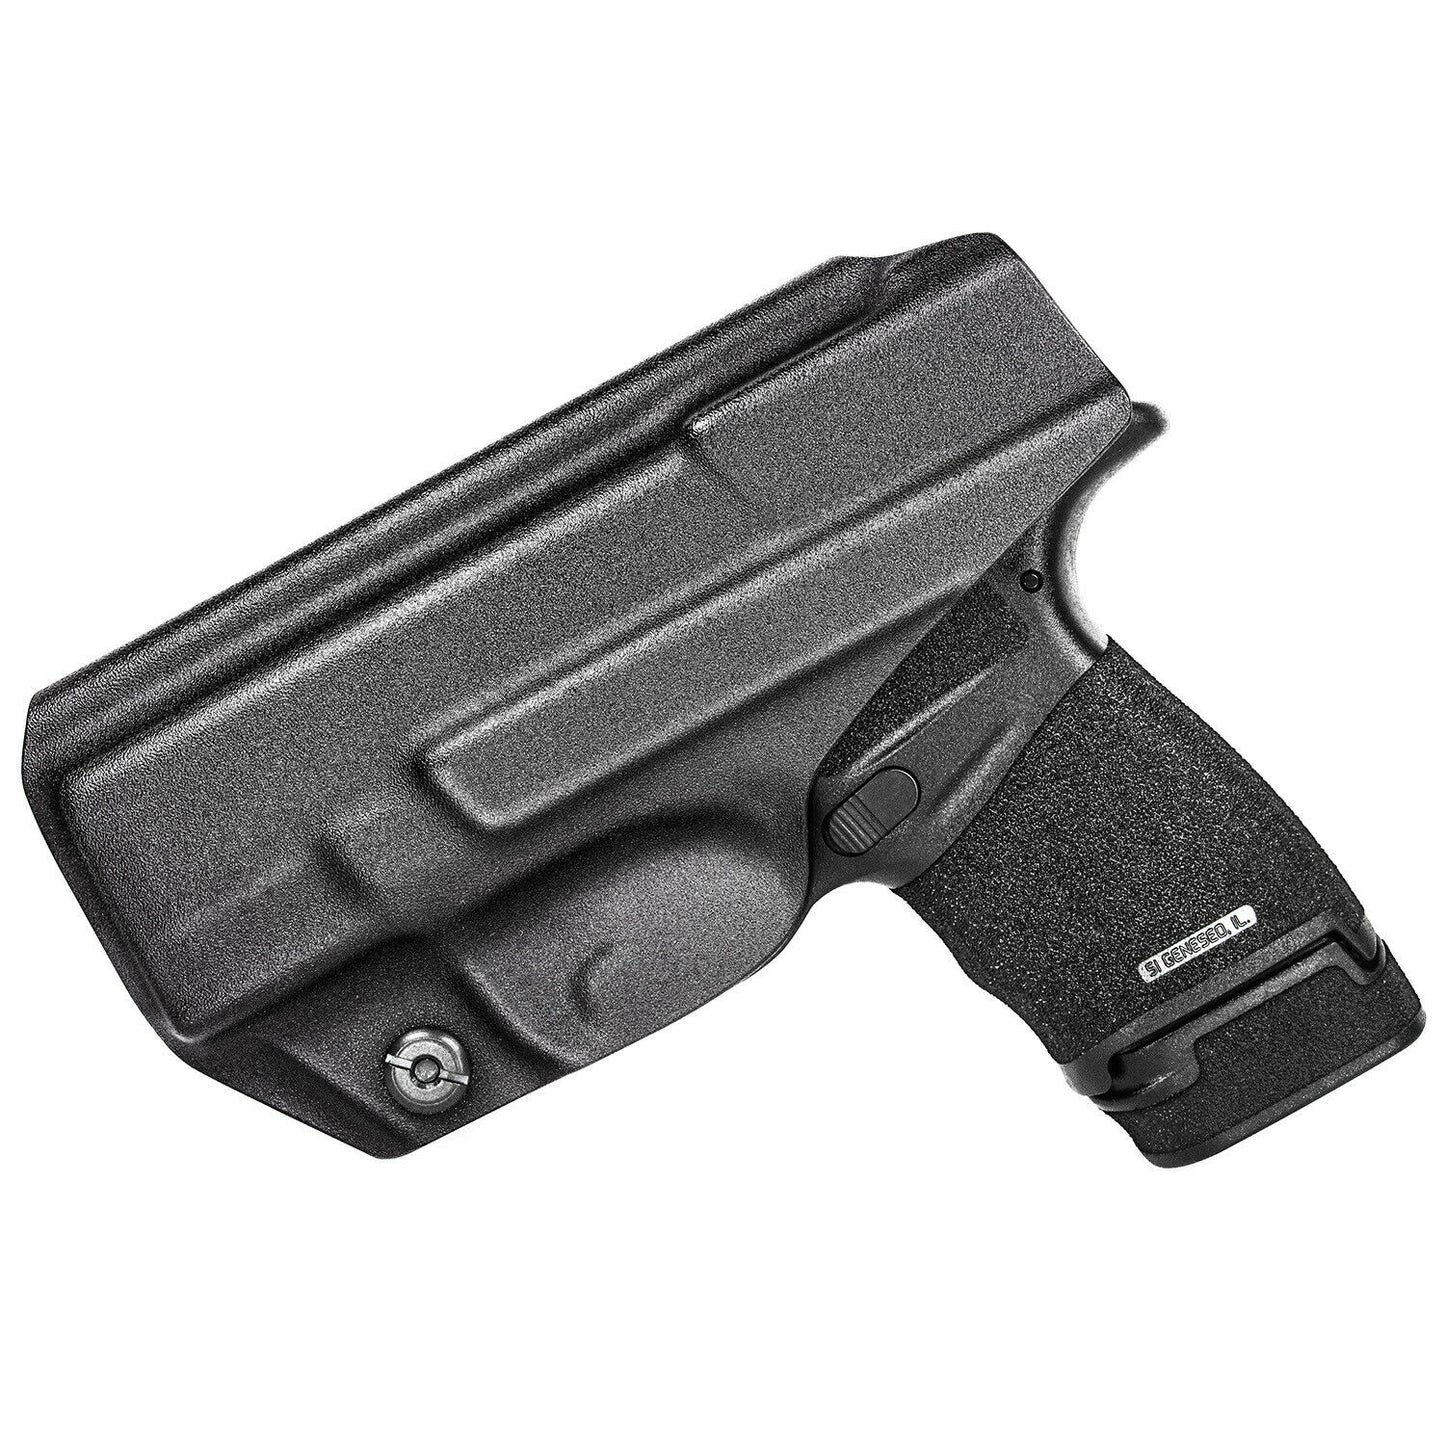 SPRINGFILED ARMORY IWB KYDEX HOLSTER